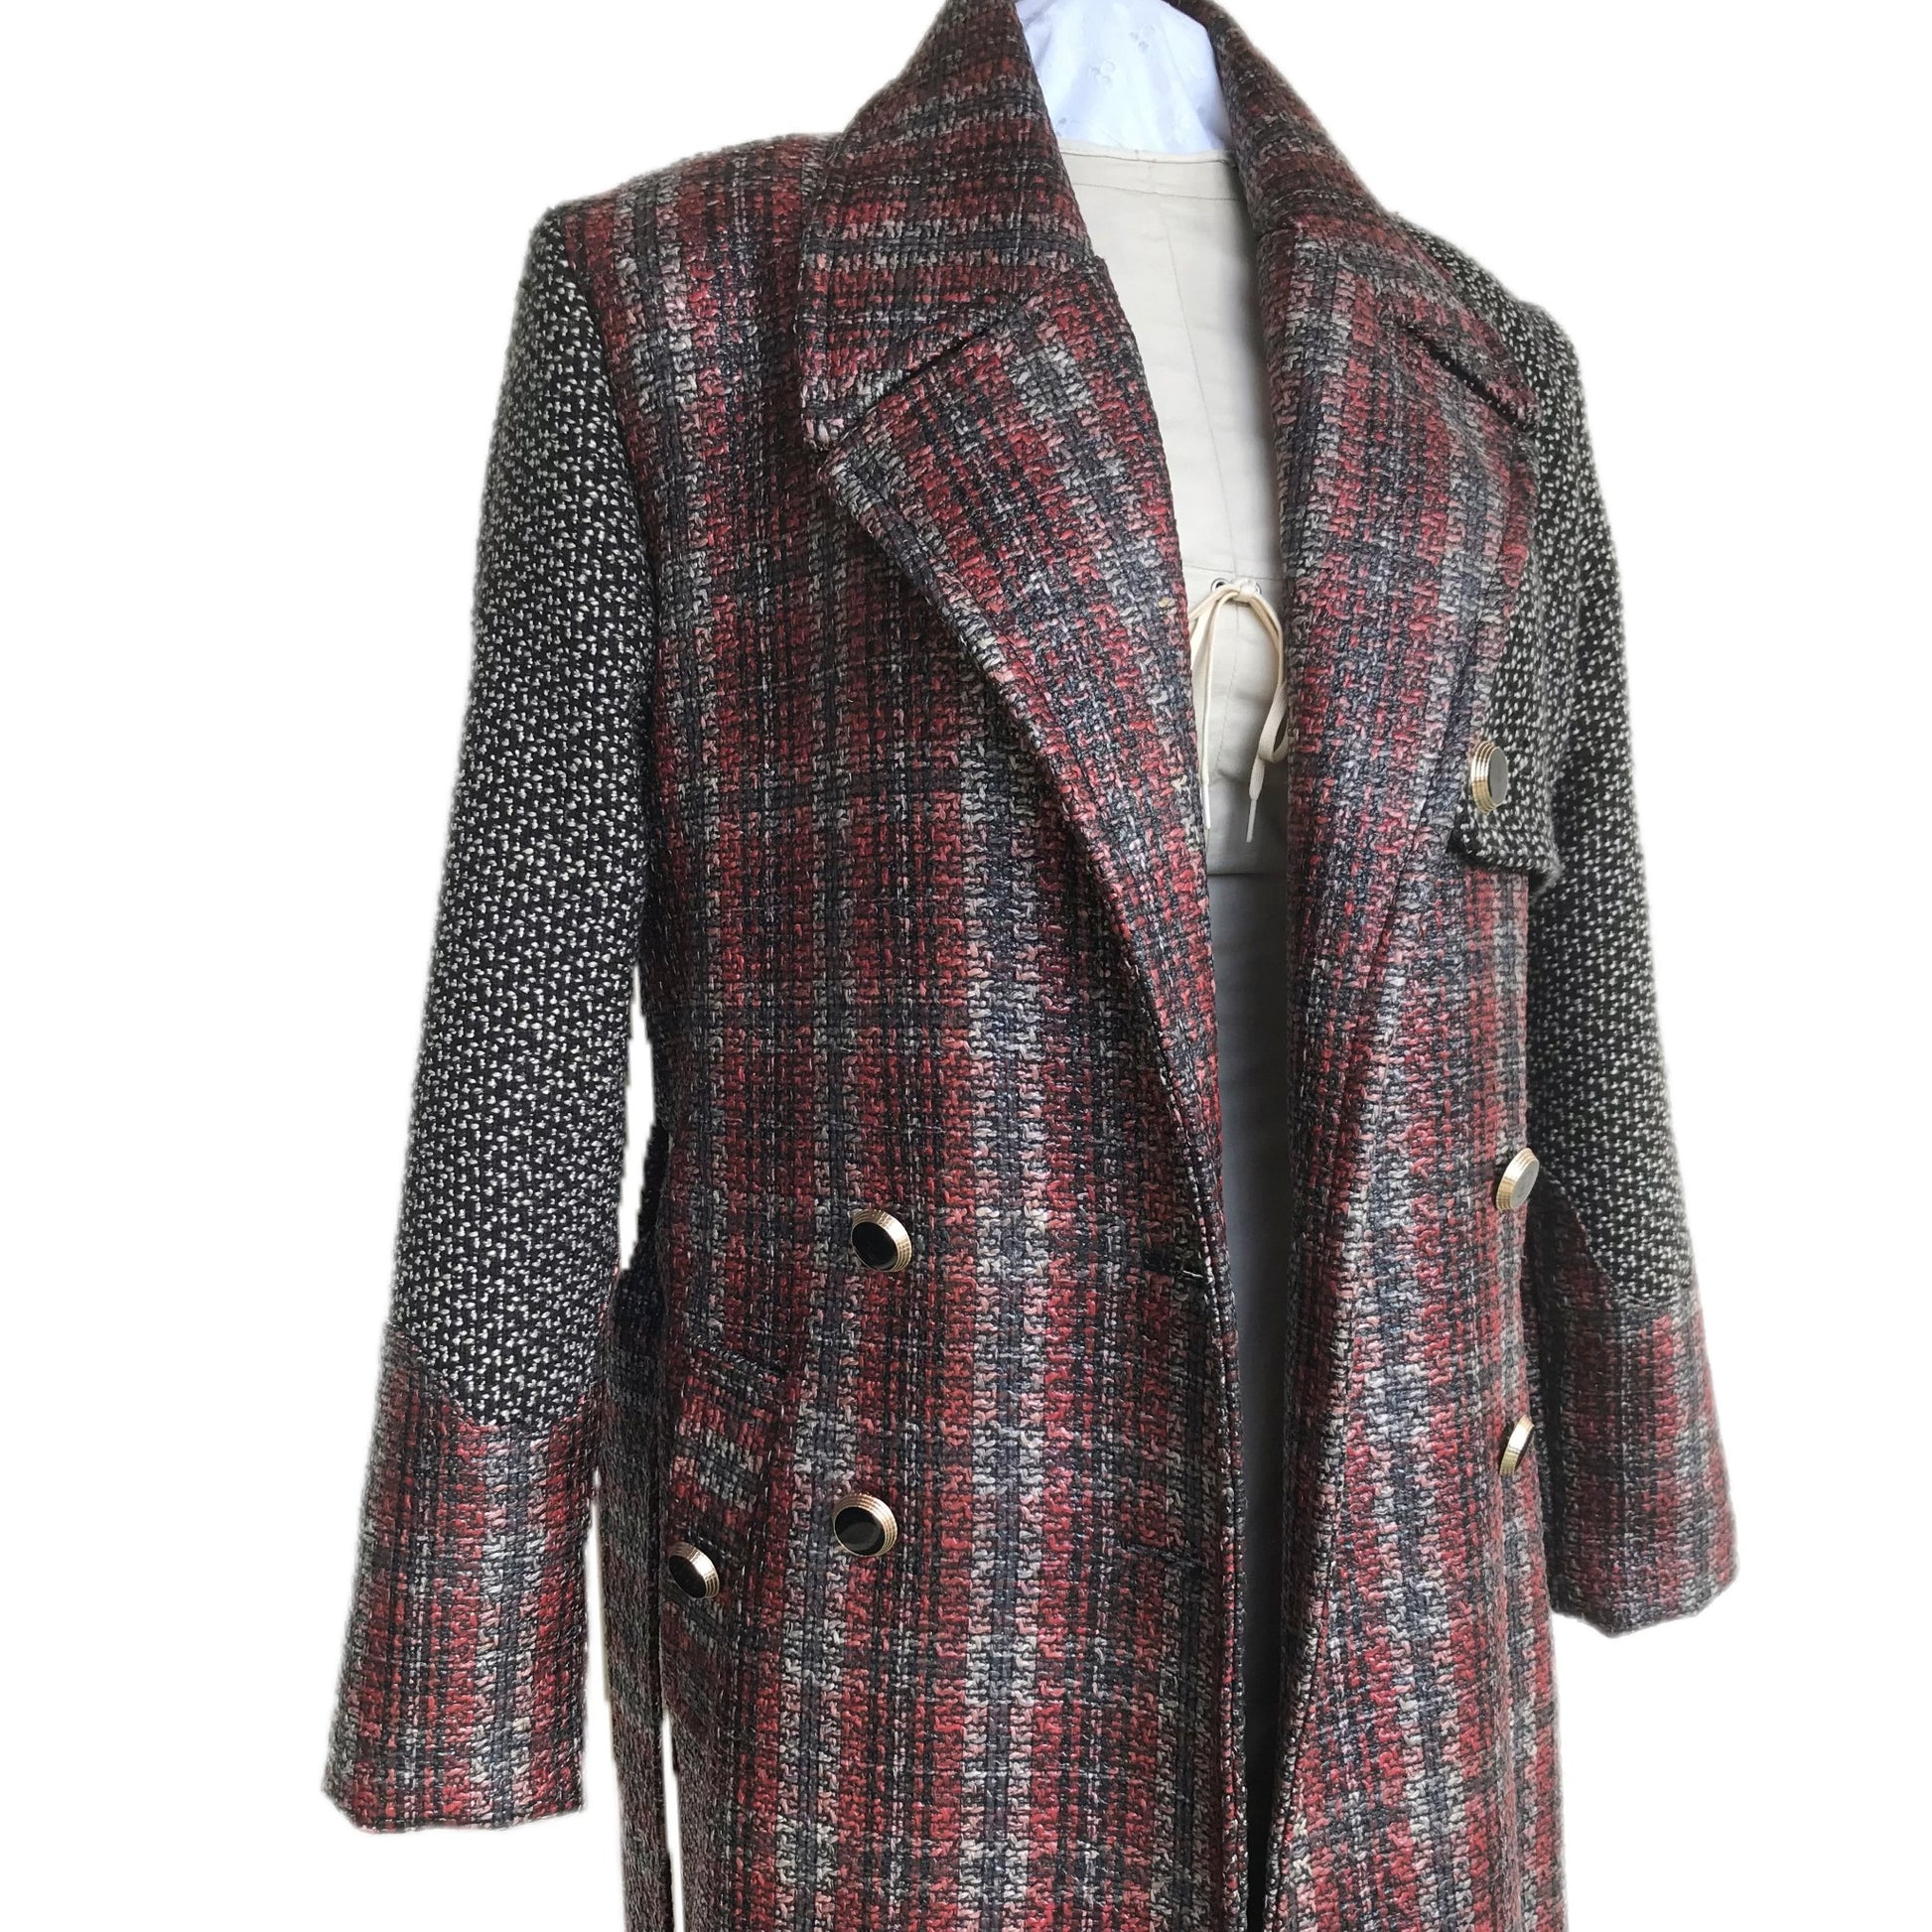 Baked Apple Plaid Laminated Tweed Trench Coat - Sz. Small - Waterproof